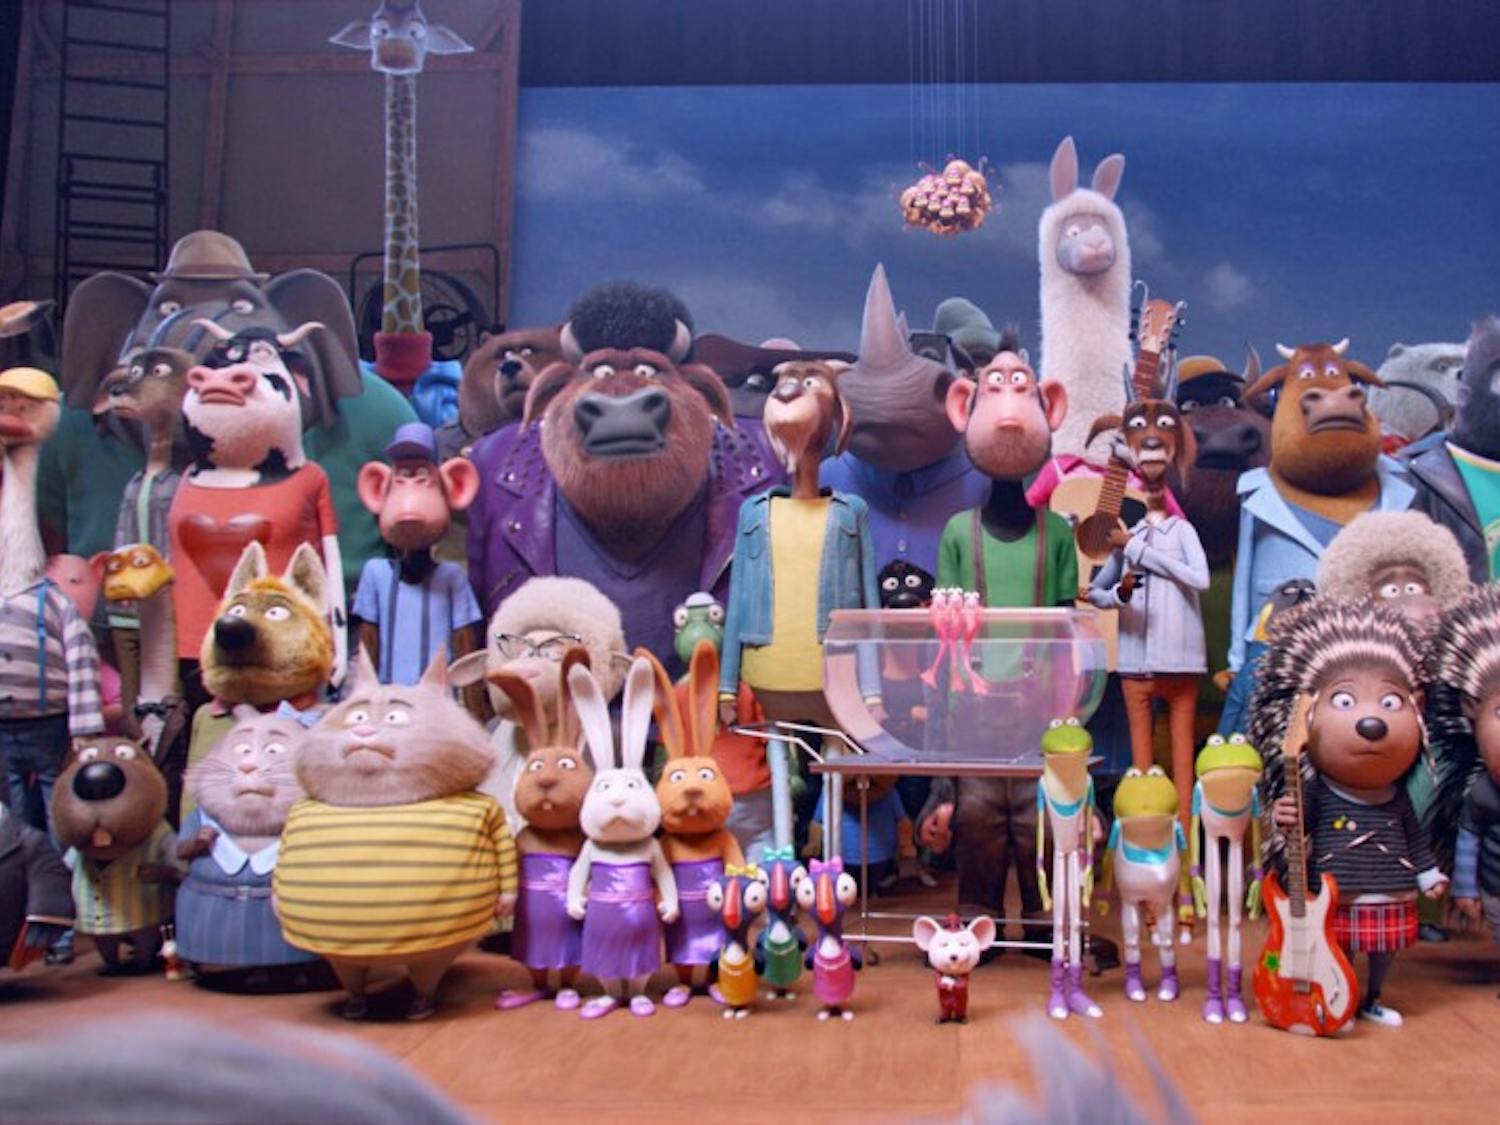 A scene from the animated film "Sing." (Illumination Entertainment)